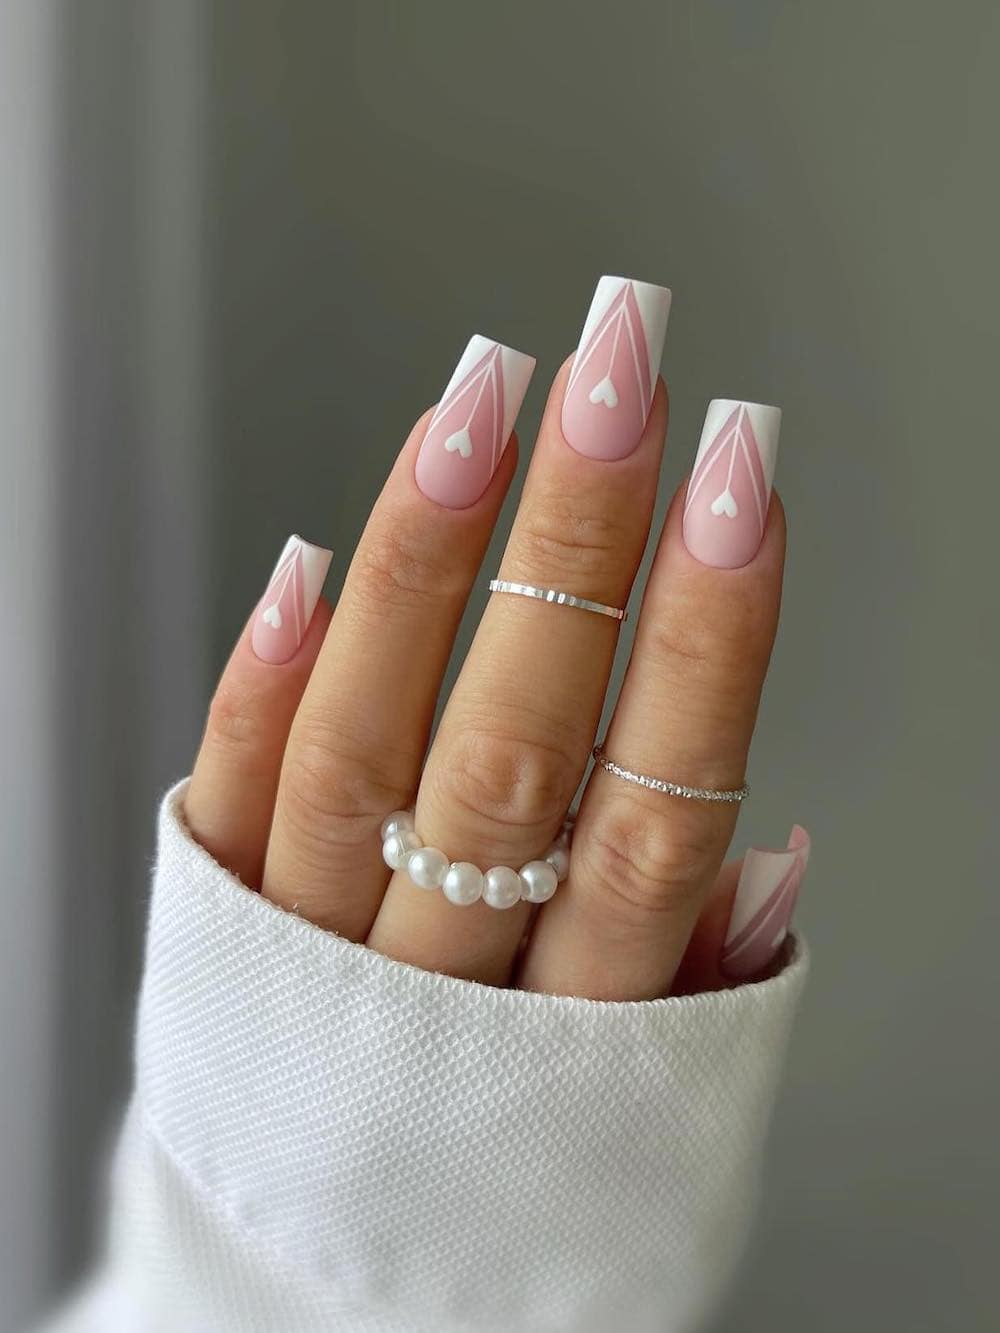 A hand with medium square nails painted a matte pink with white pointed French tips, white outlines and hearts